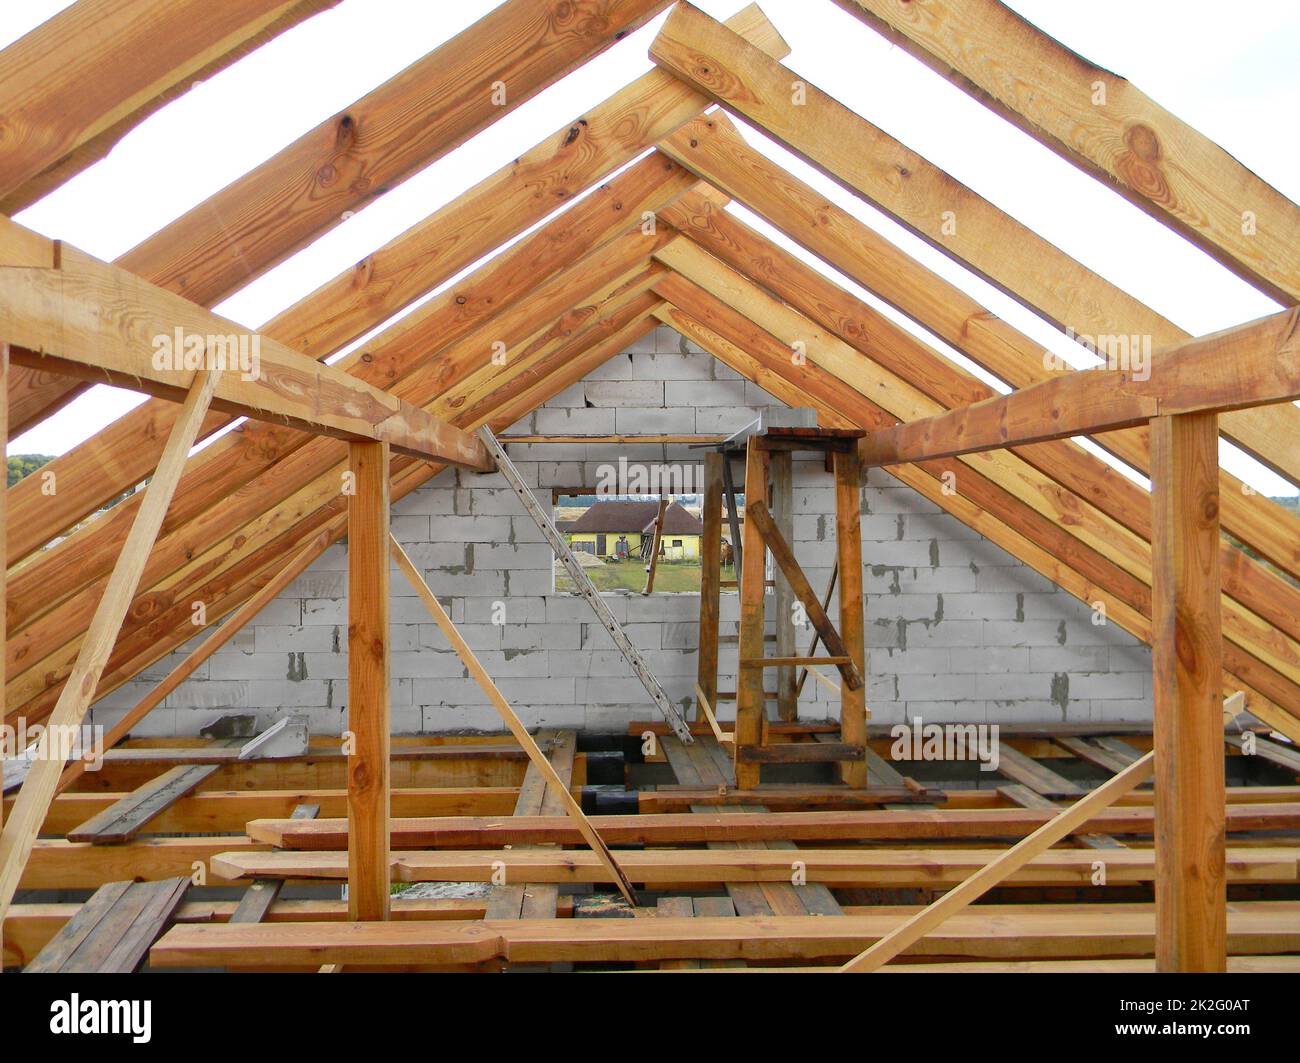 Unfinished attic house roofing construction trusses, wooden beams, eaves, timber.  House roof wooden frame construction. Stock Photo